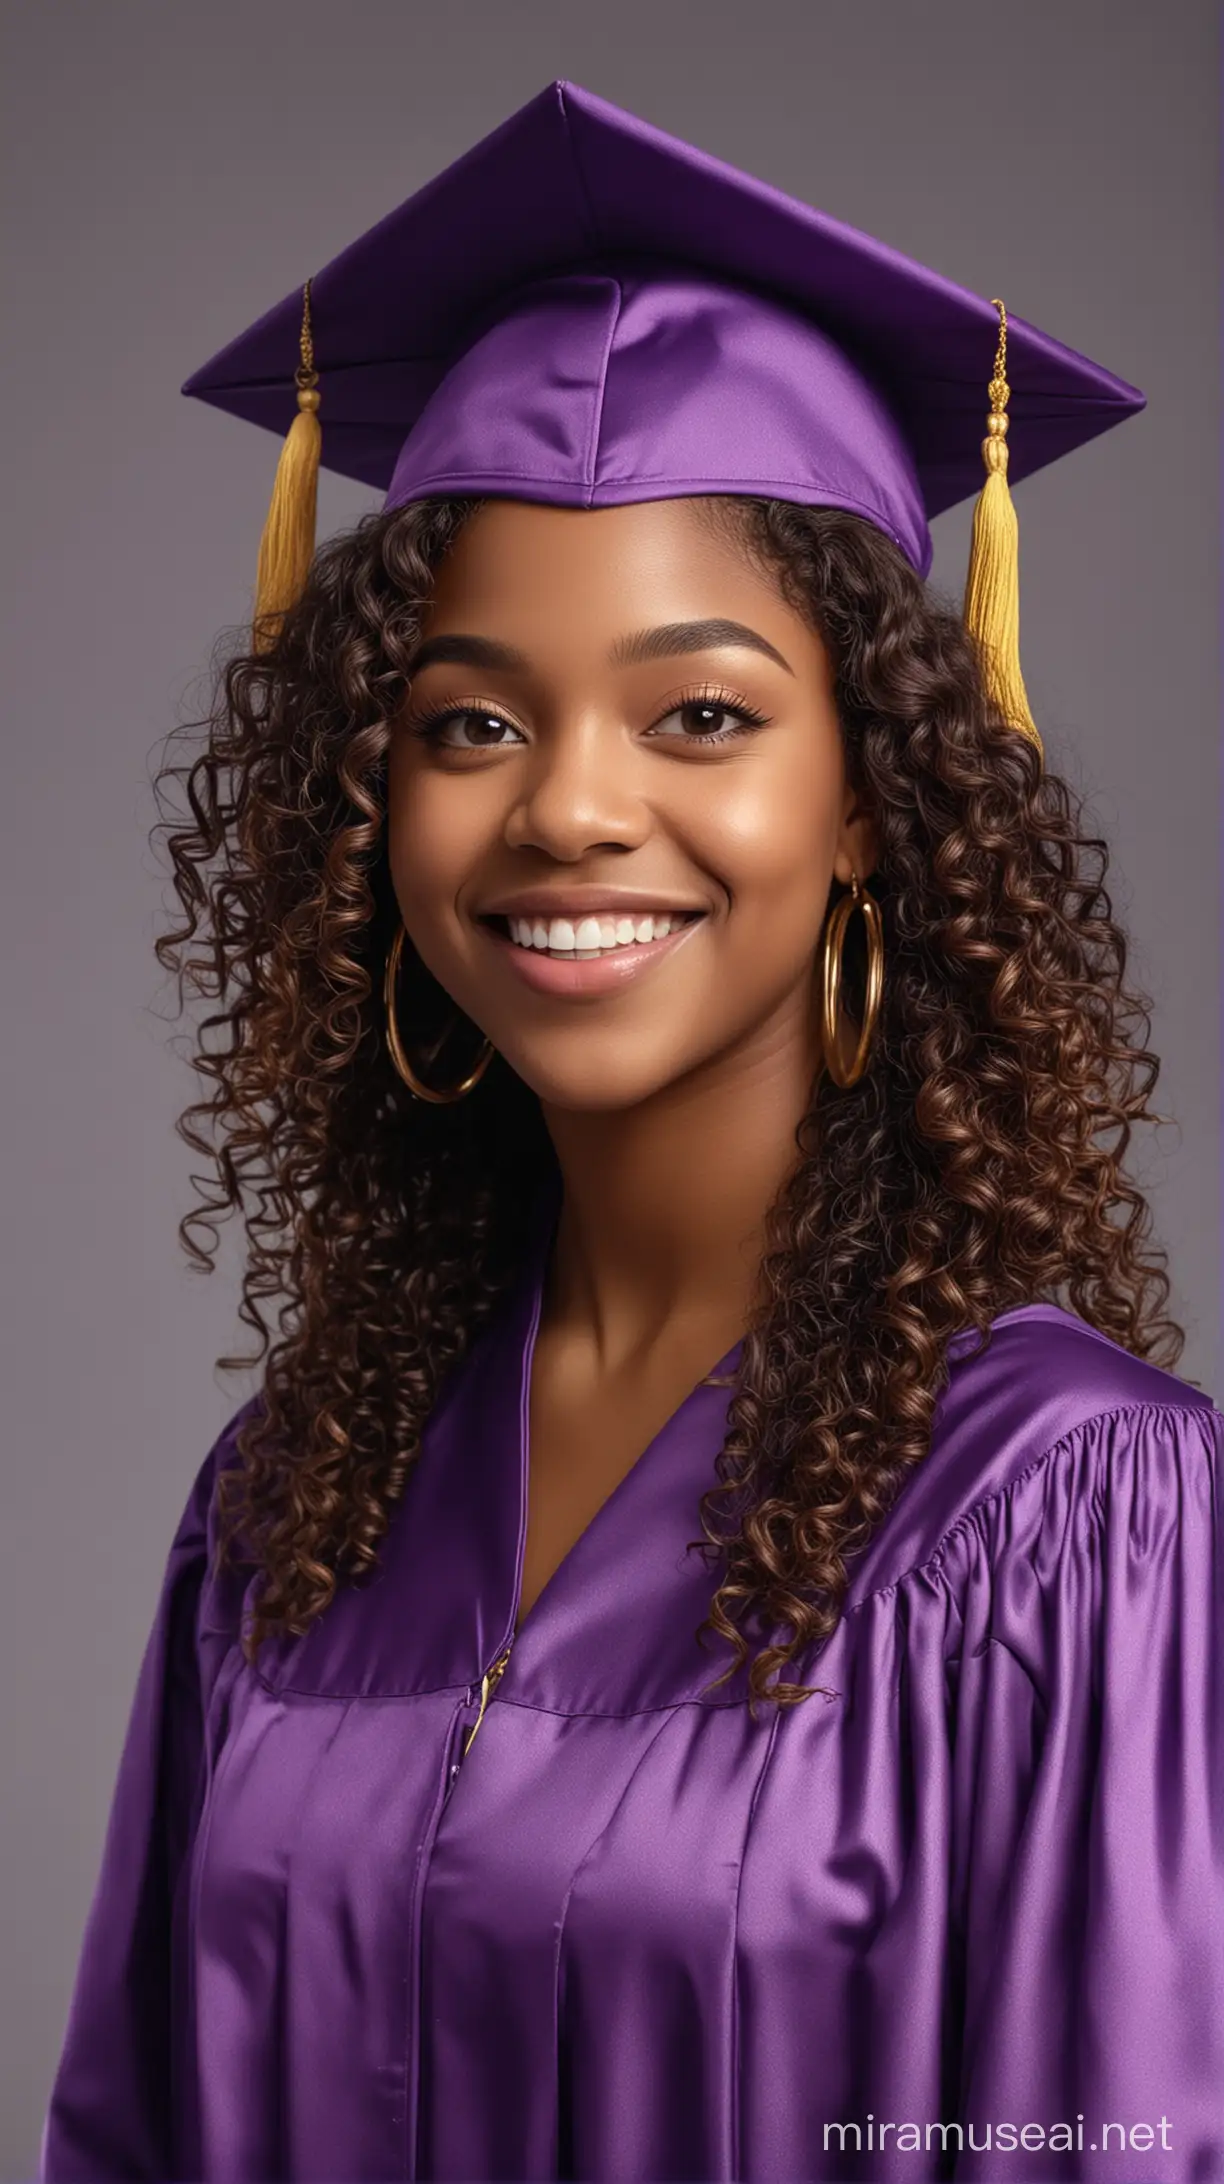 a hyper-realistic African American young lady around the age of 17. She is wearing a purple graduation cap and gown. She has long ombre curly hair, long lashes, long nails with polish, gold hoop earrings. She is smiling and posing for professional graduation photos, full view, looking at camera, 4k 